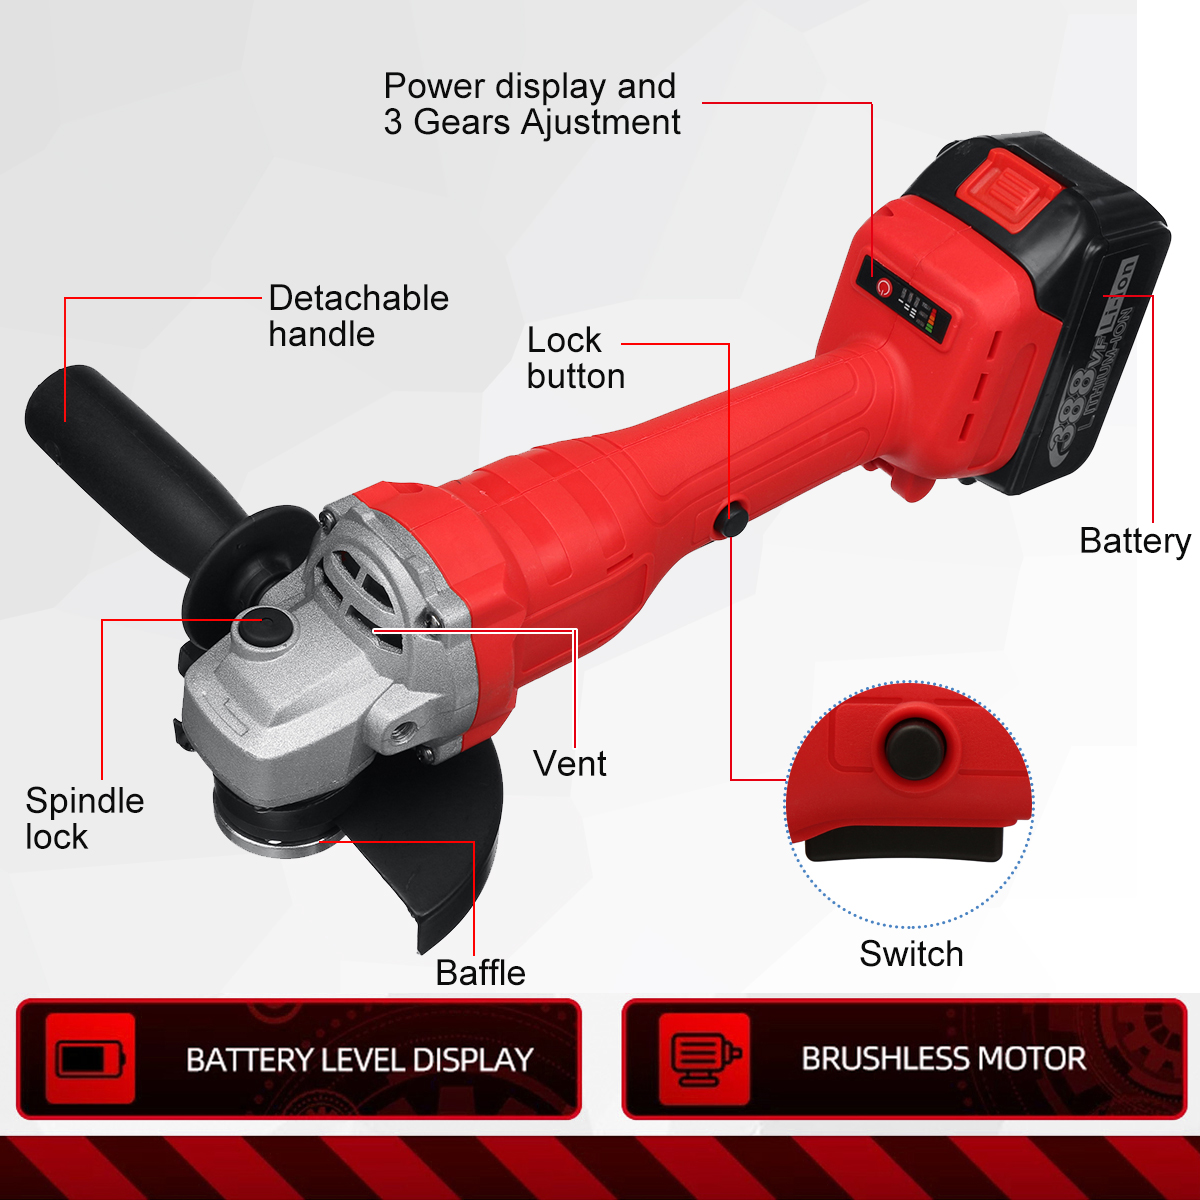 388VF-125MM-1500W-Cordless-Brushless-Angle-Grinder-Electric-Polisher-W-None12-Battery-Cutting-Sand-D-1879534-3